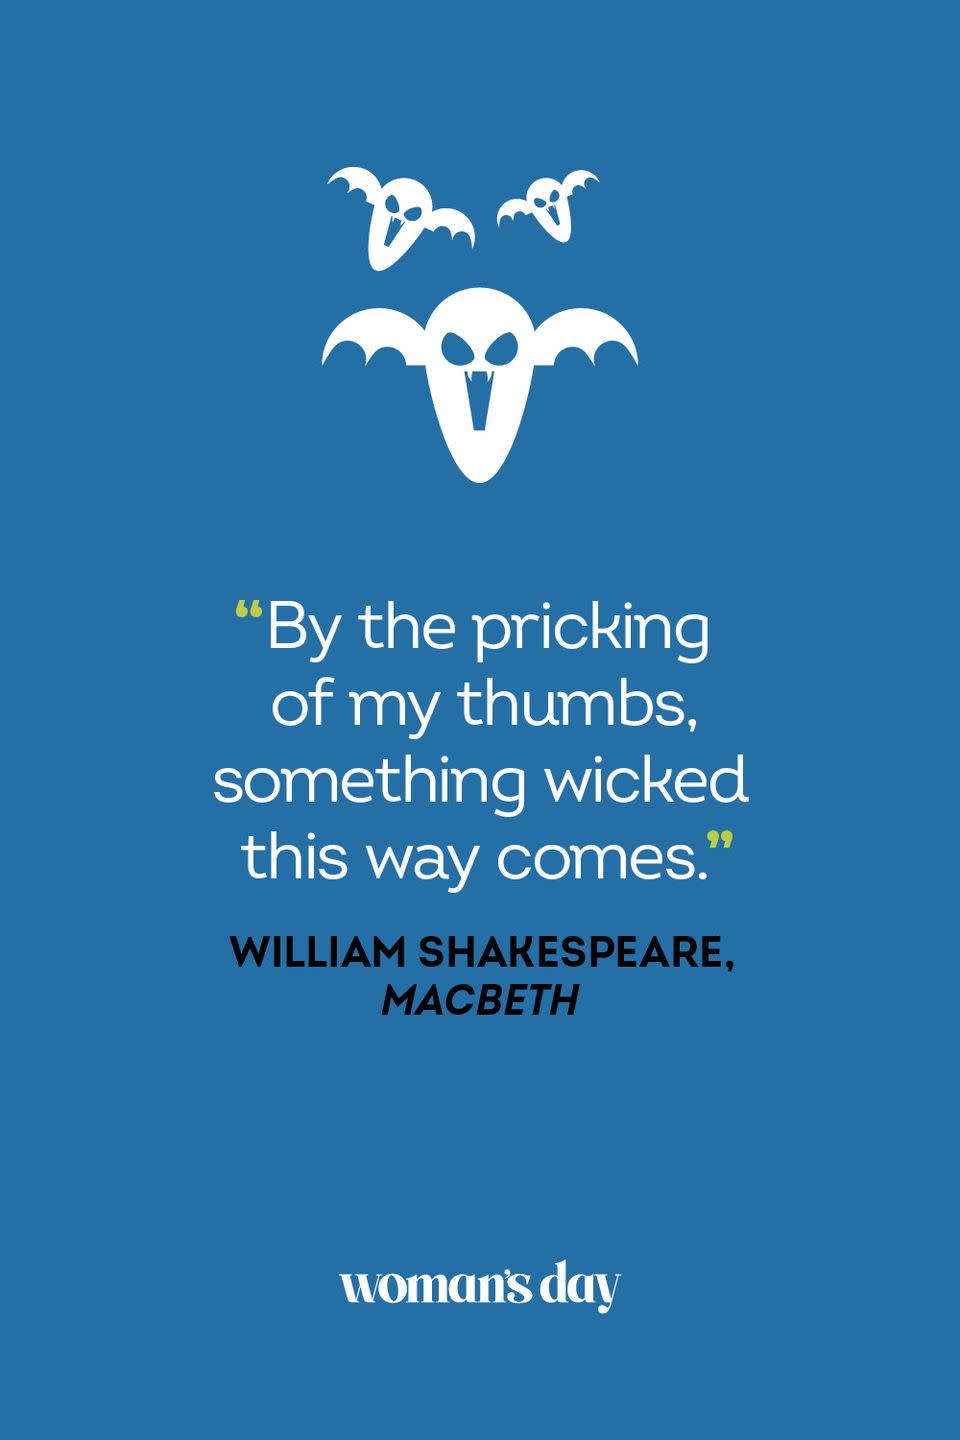 50 Scary Quotes to Make You Scream This Halloween